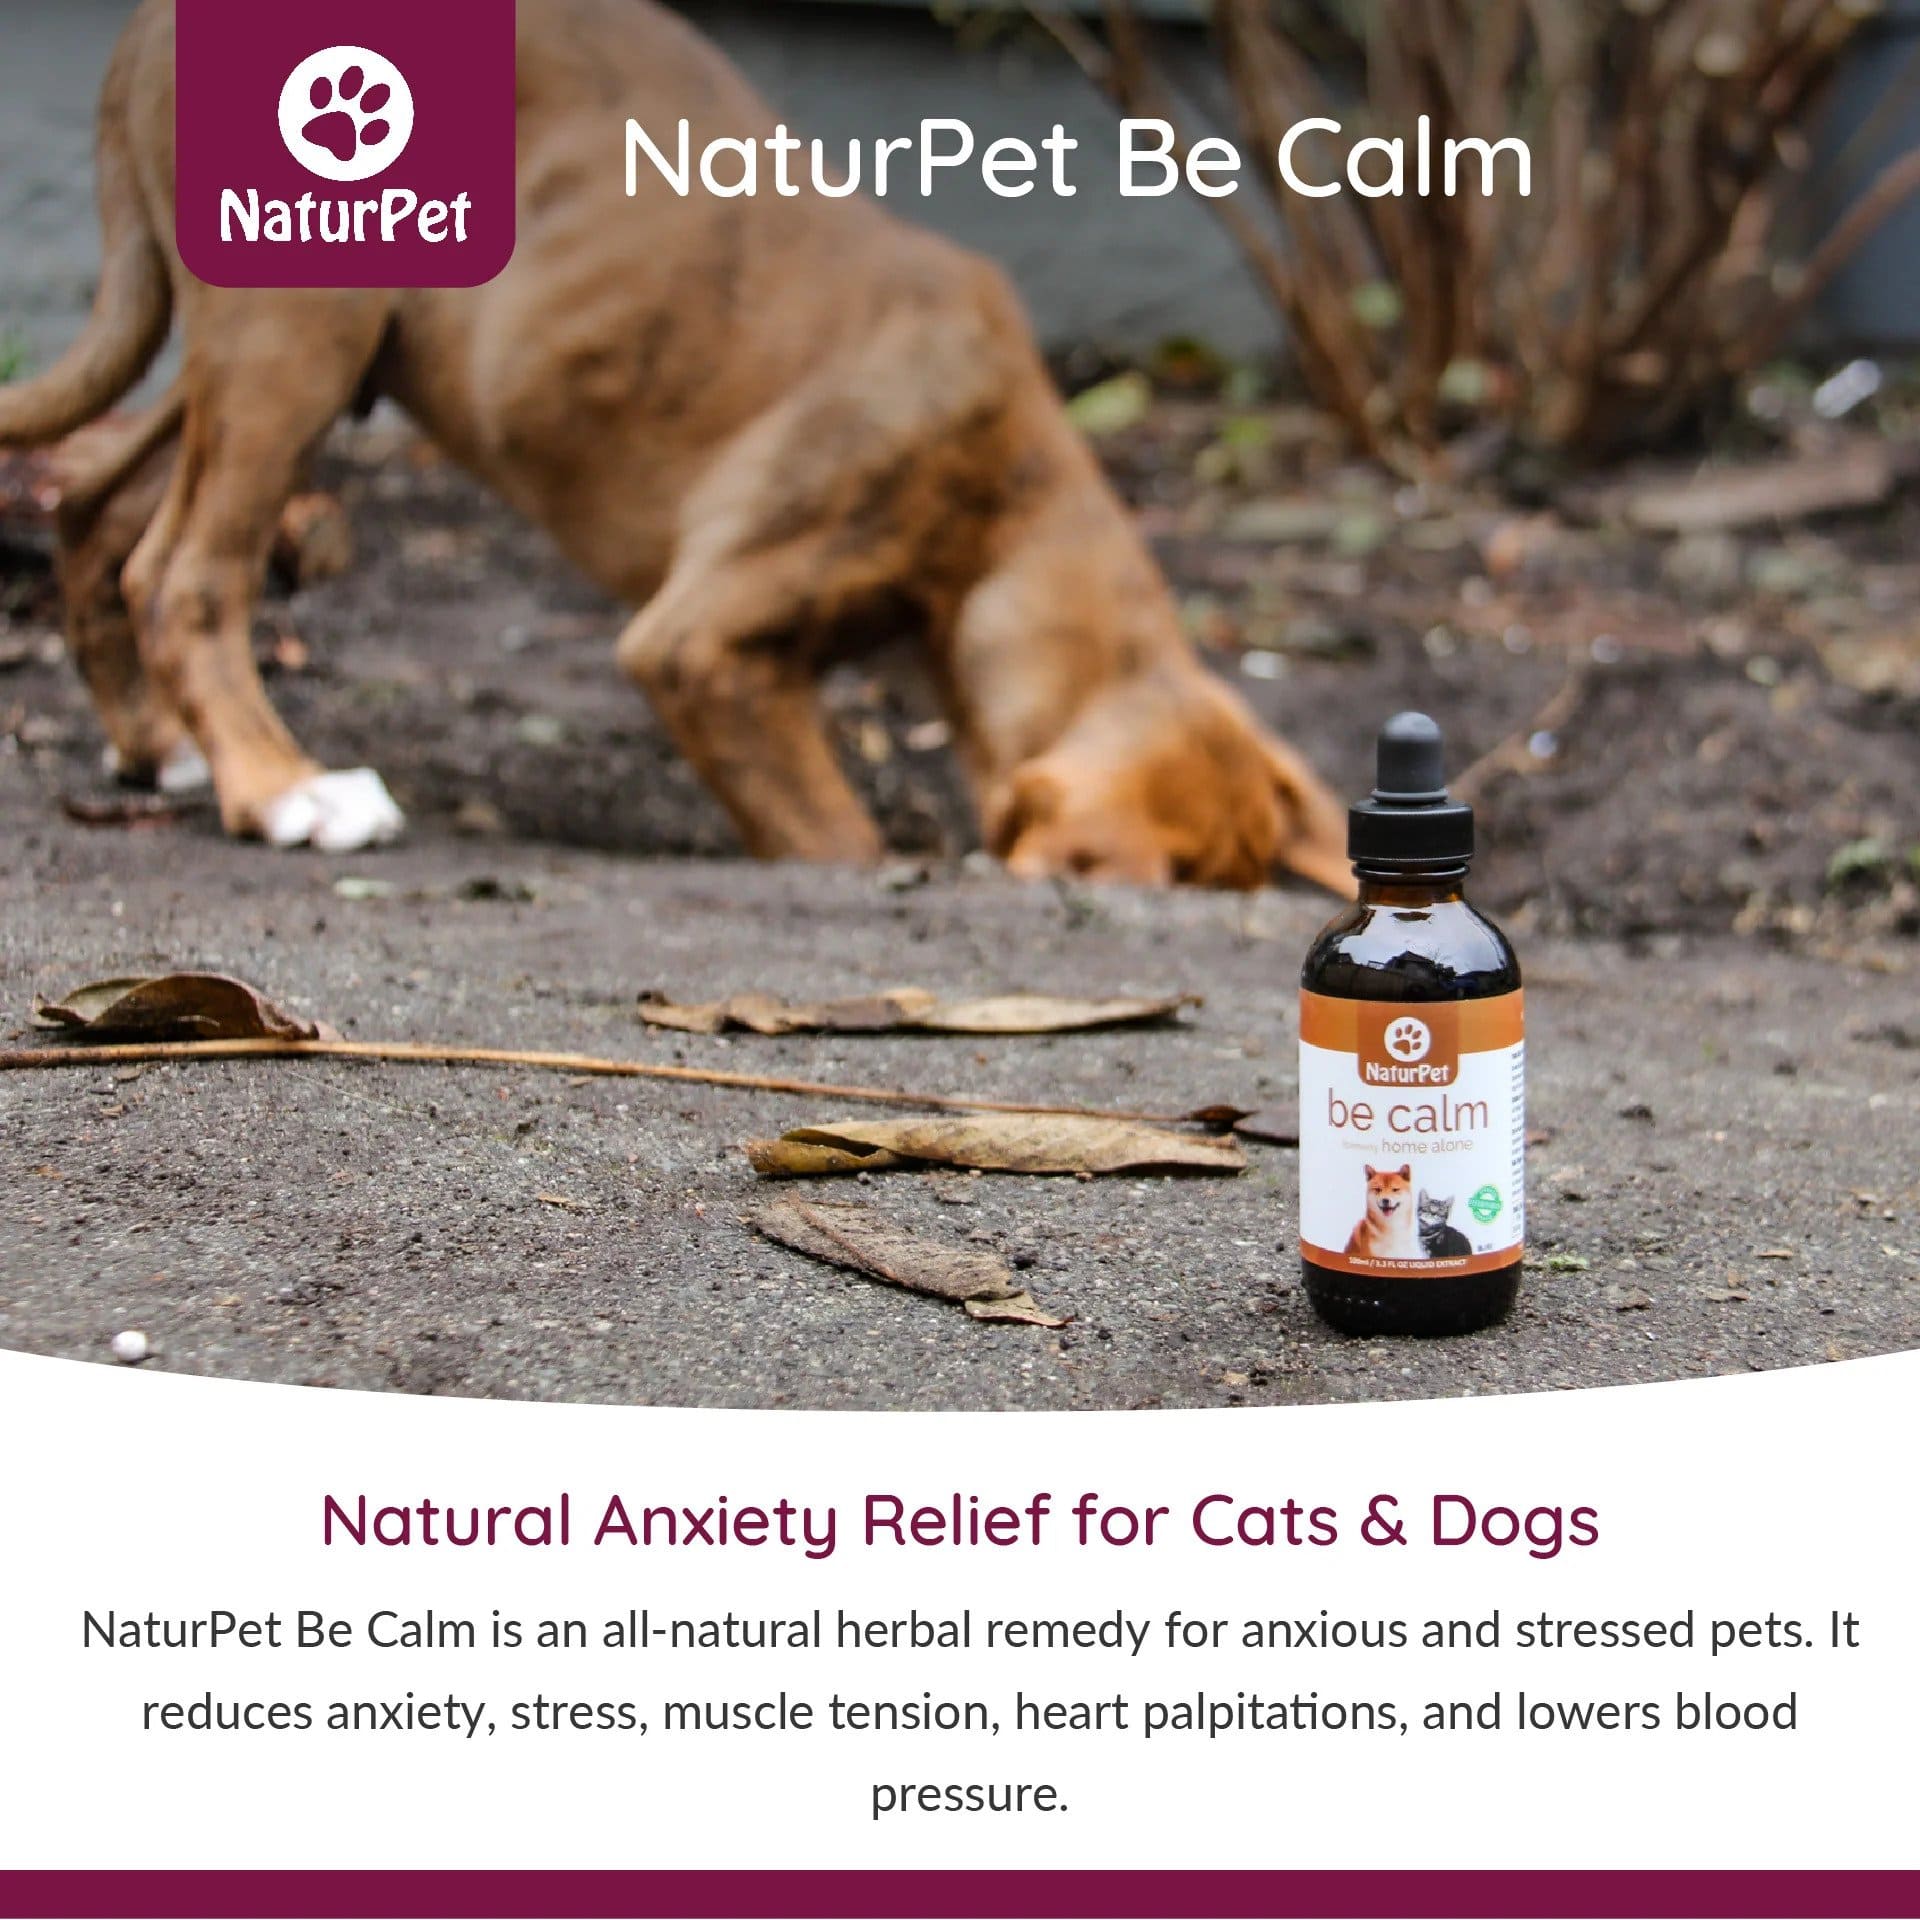 NaturPet Be Calm - Soothe Your Stressed Pet How to use